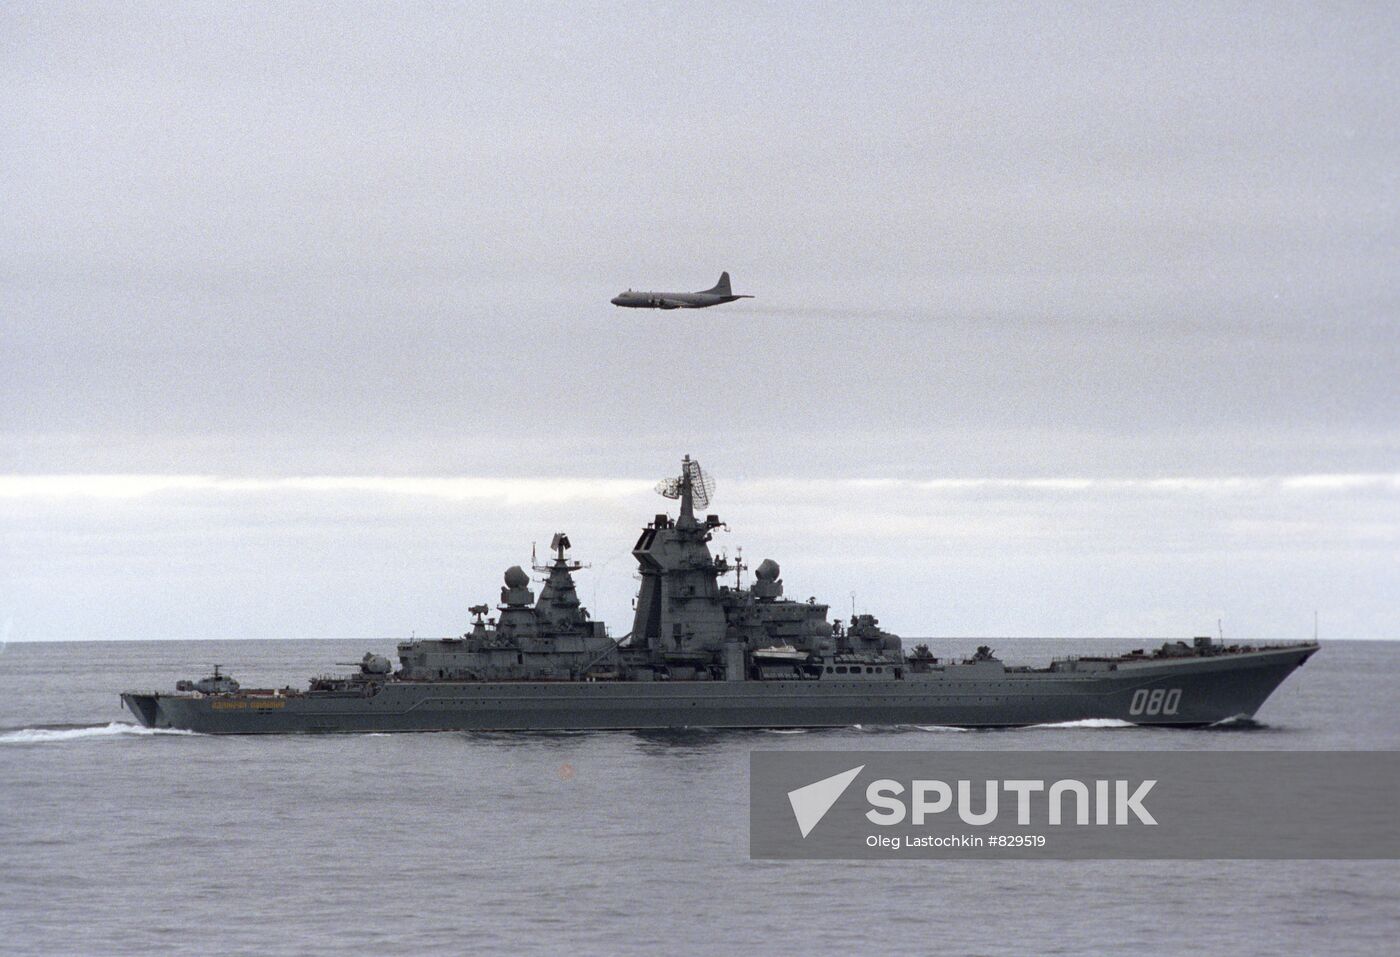 Missile cruiser ‘Admiral Nakhimov’ and aircraft ‘Orion’